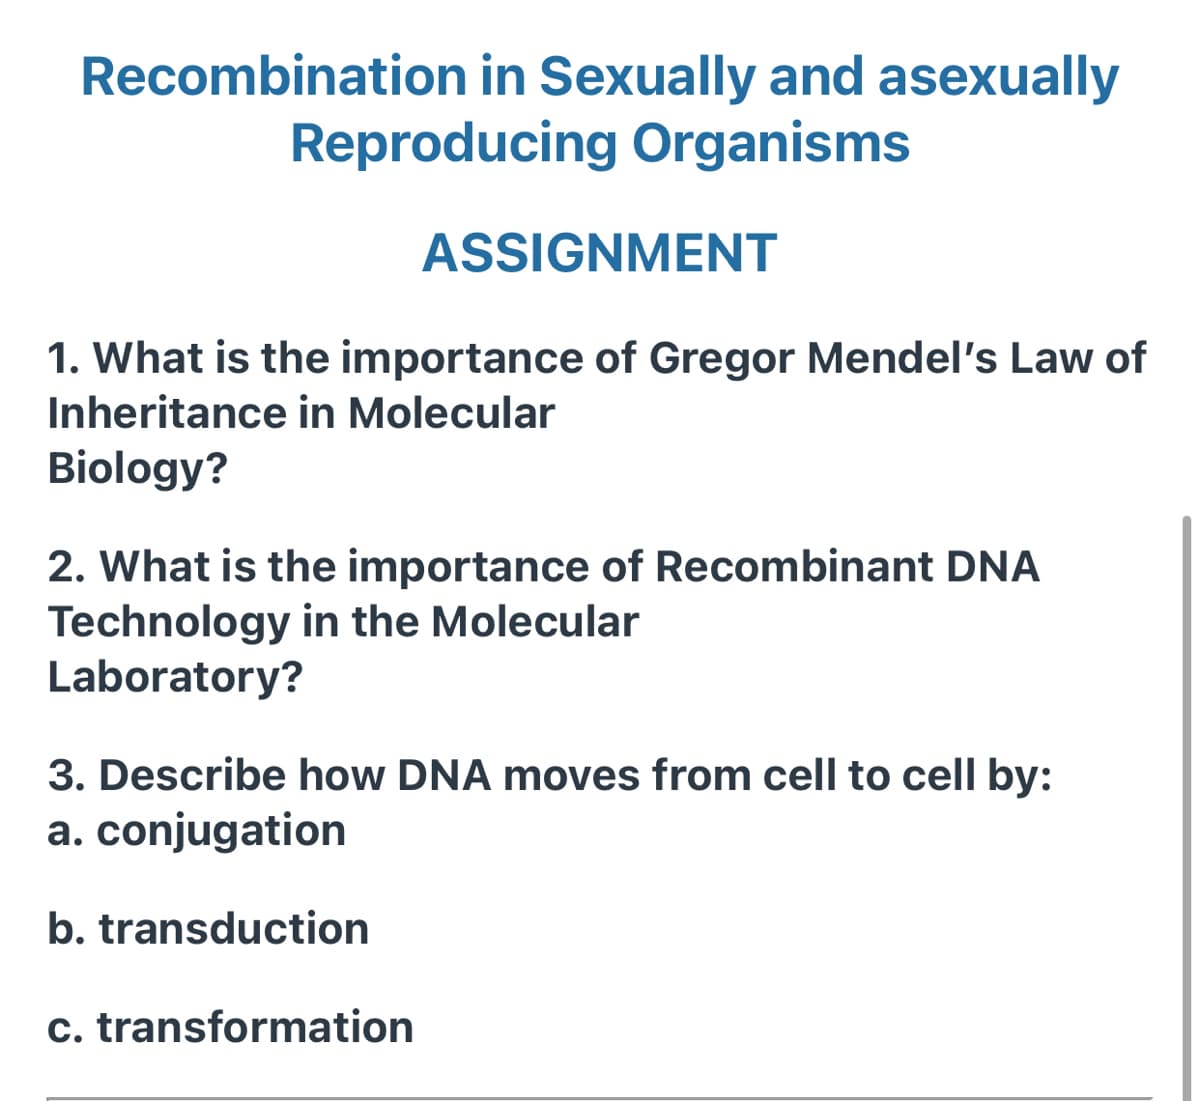 Recombination in Sexually and asexually
Reproducing Organisms
ASSIGNMENT
1. What is the importance of Gregor Mendel's Law of
Inheritance in Molecular
Biology?
2. What is the importance of Recombinant DNA
Technology in the Molecular
Laboratory?
3. Describe how DNA moves from cell to cell by:
a. conjugation
b. transduction
c. transformation
